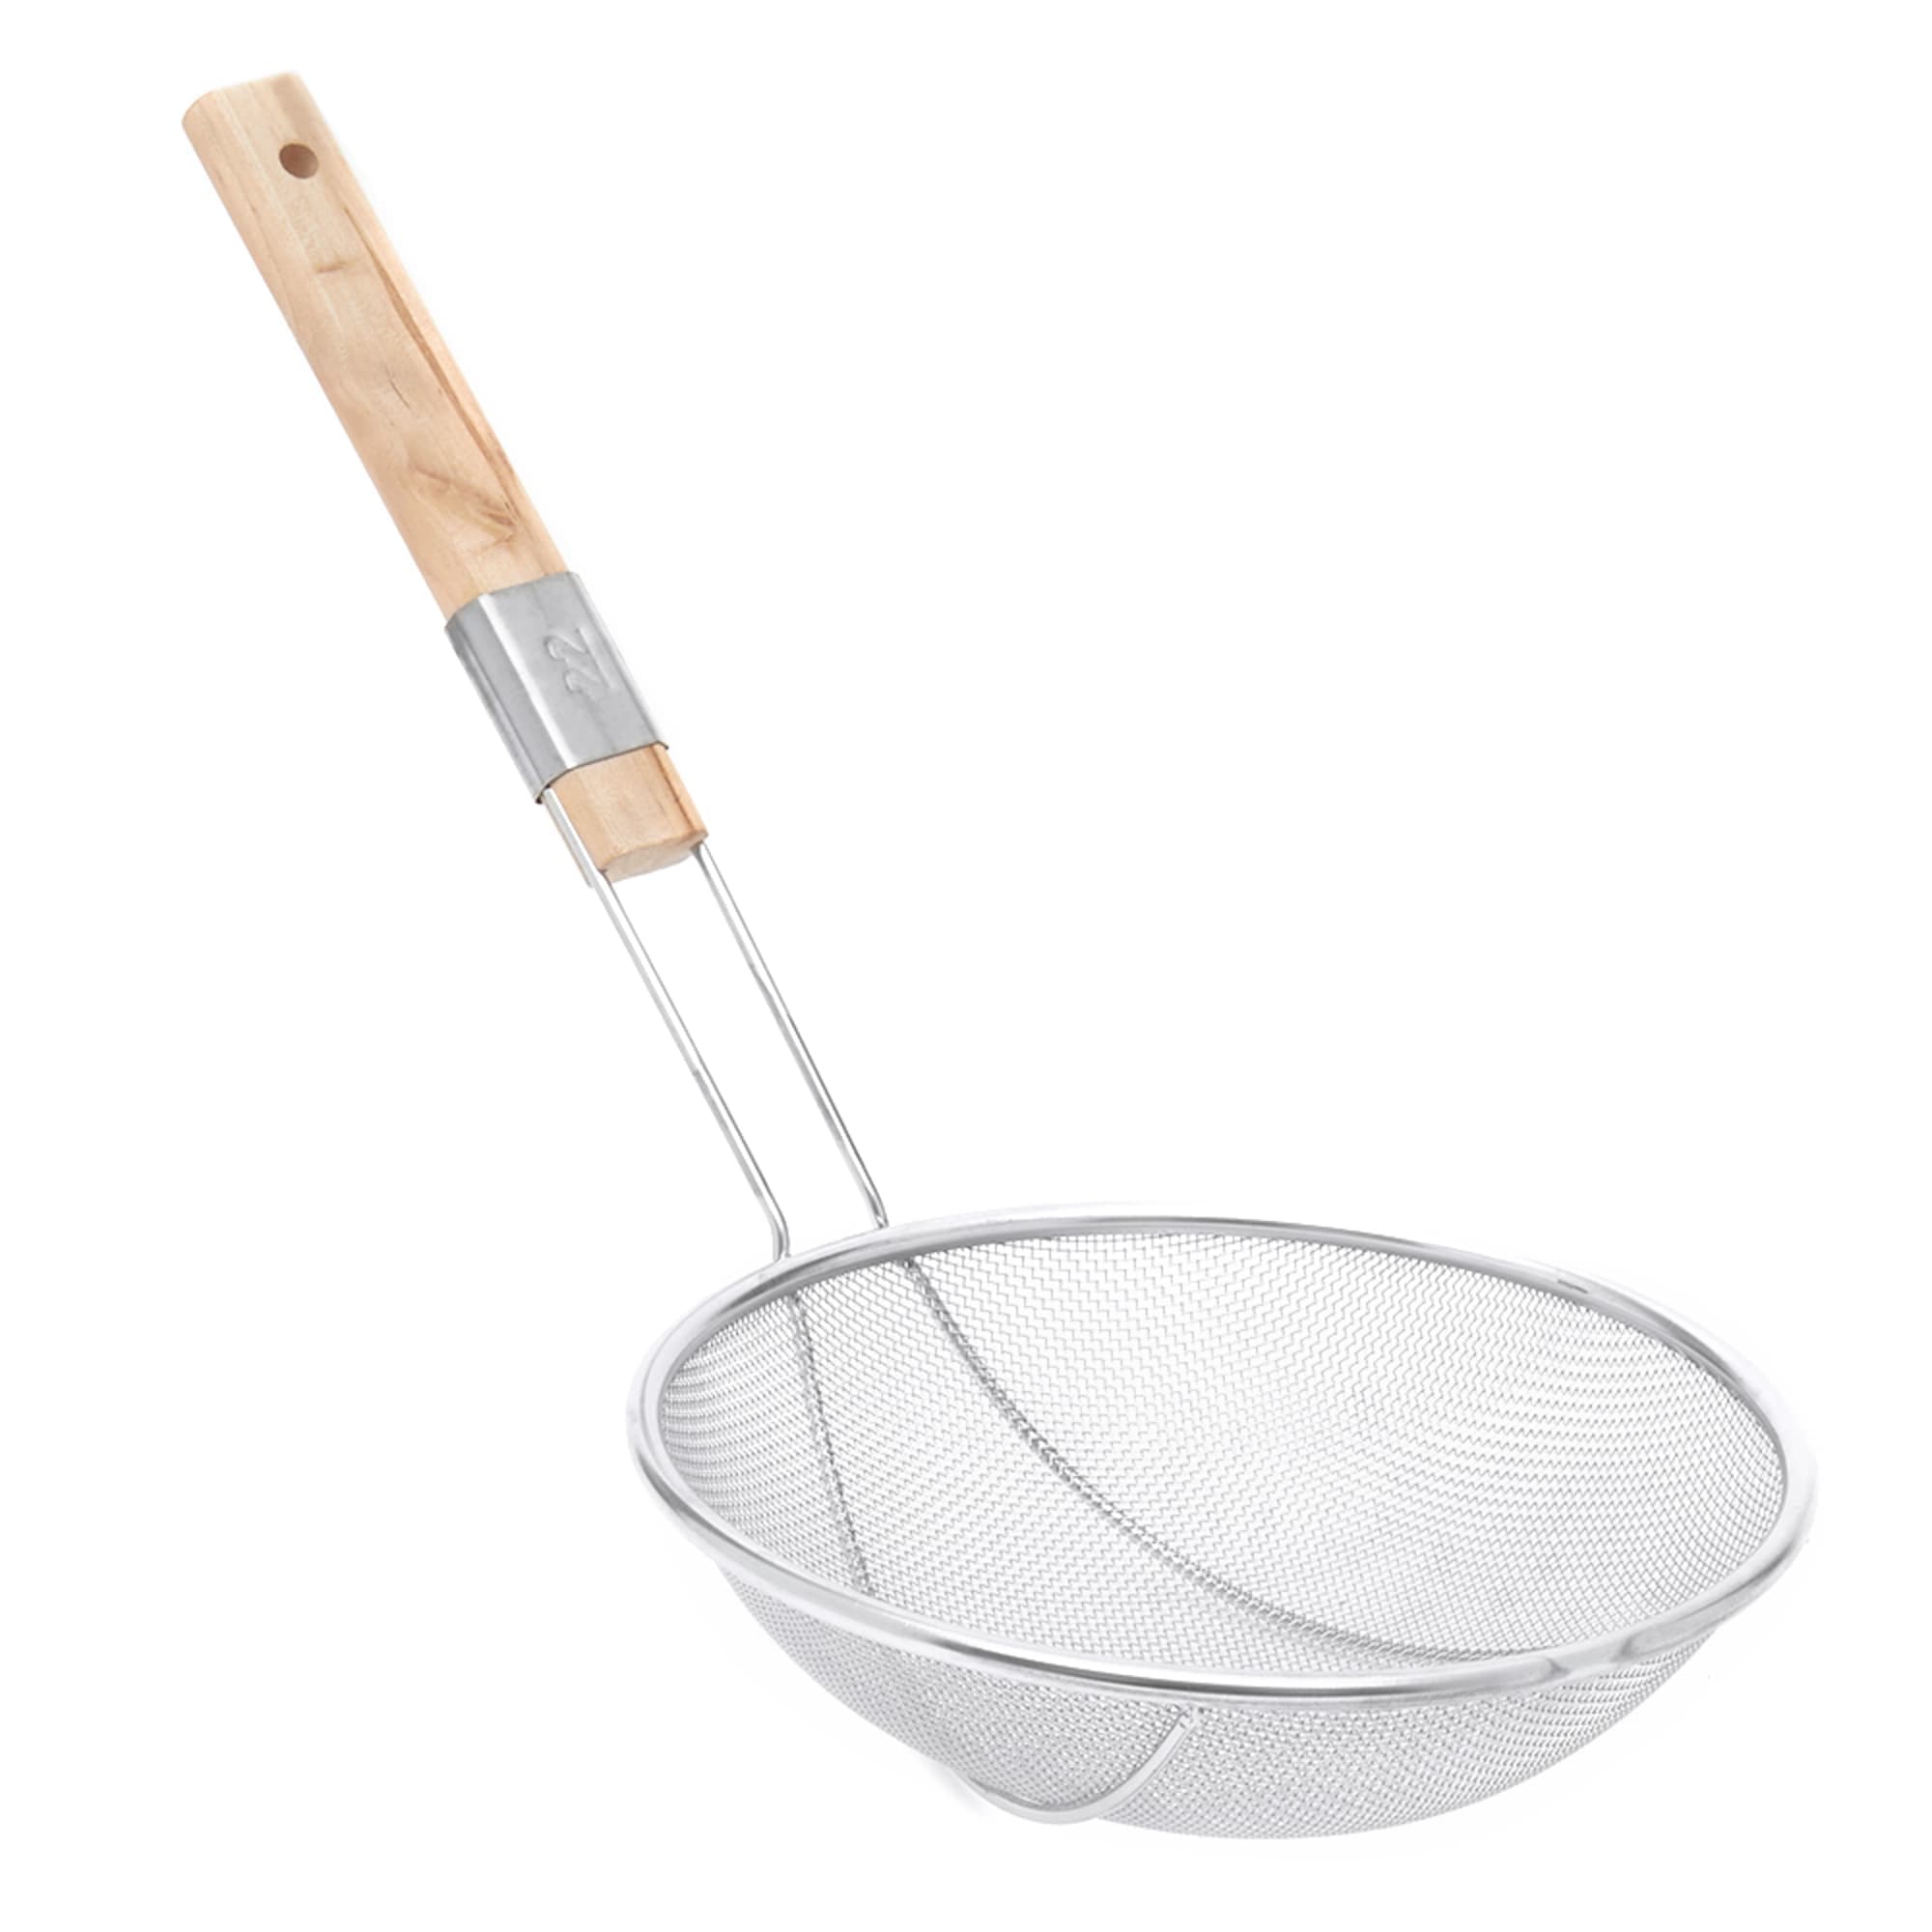 Home Basics Stainless Steel Skimmer with Wooden Handle $4.00 EACH, CASE PACK OF 24